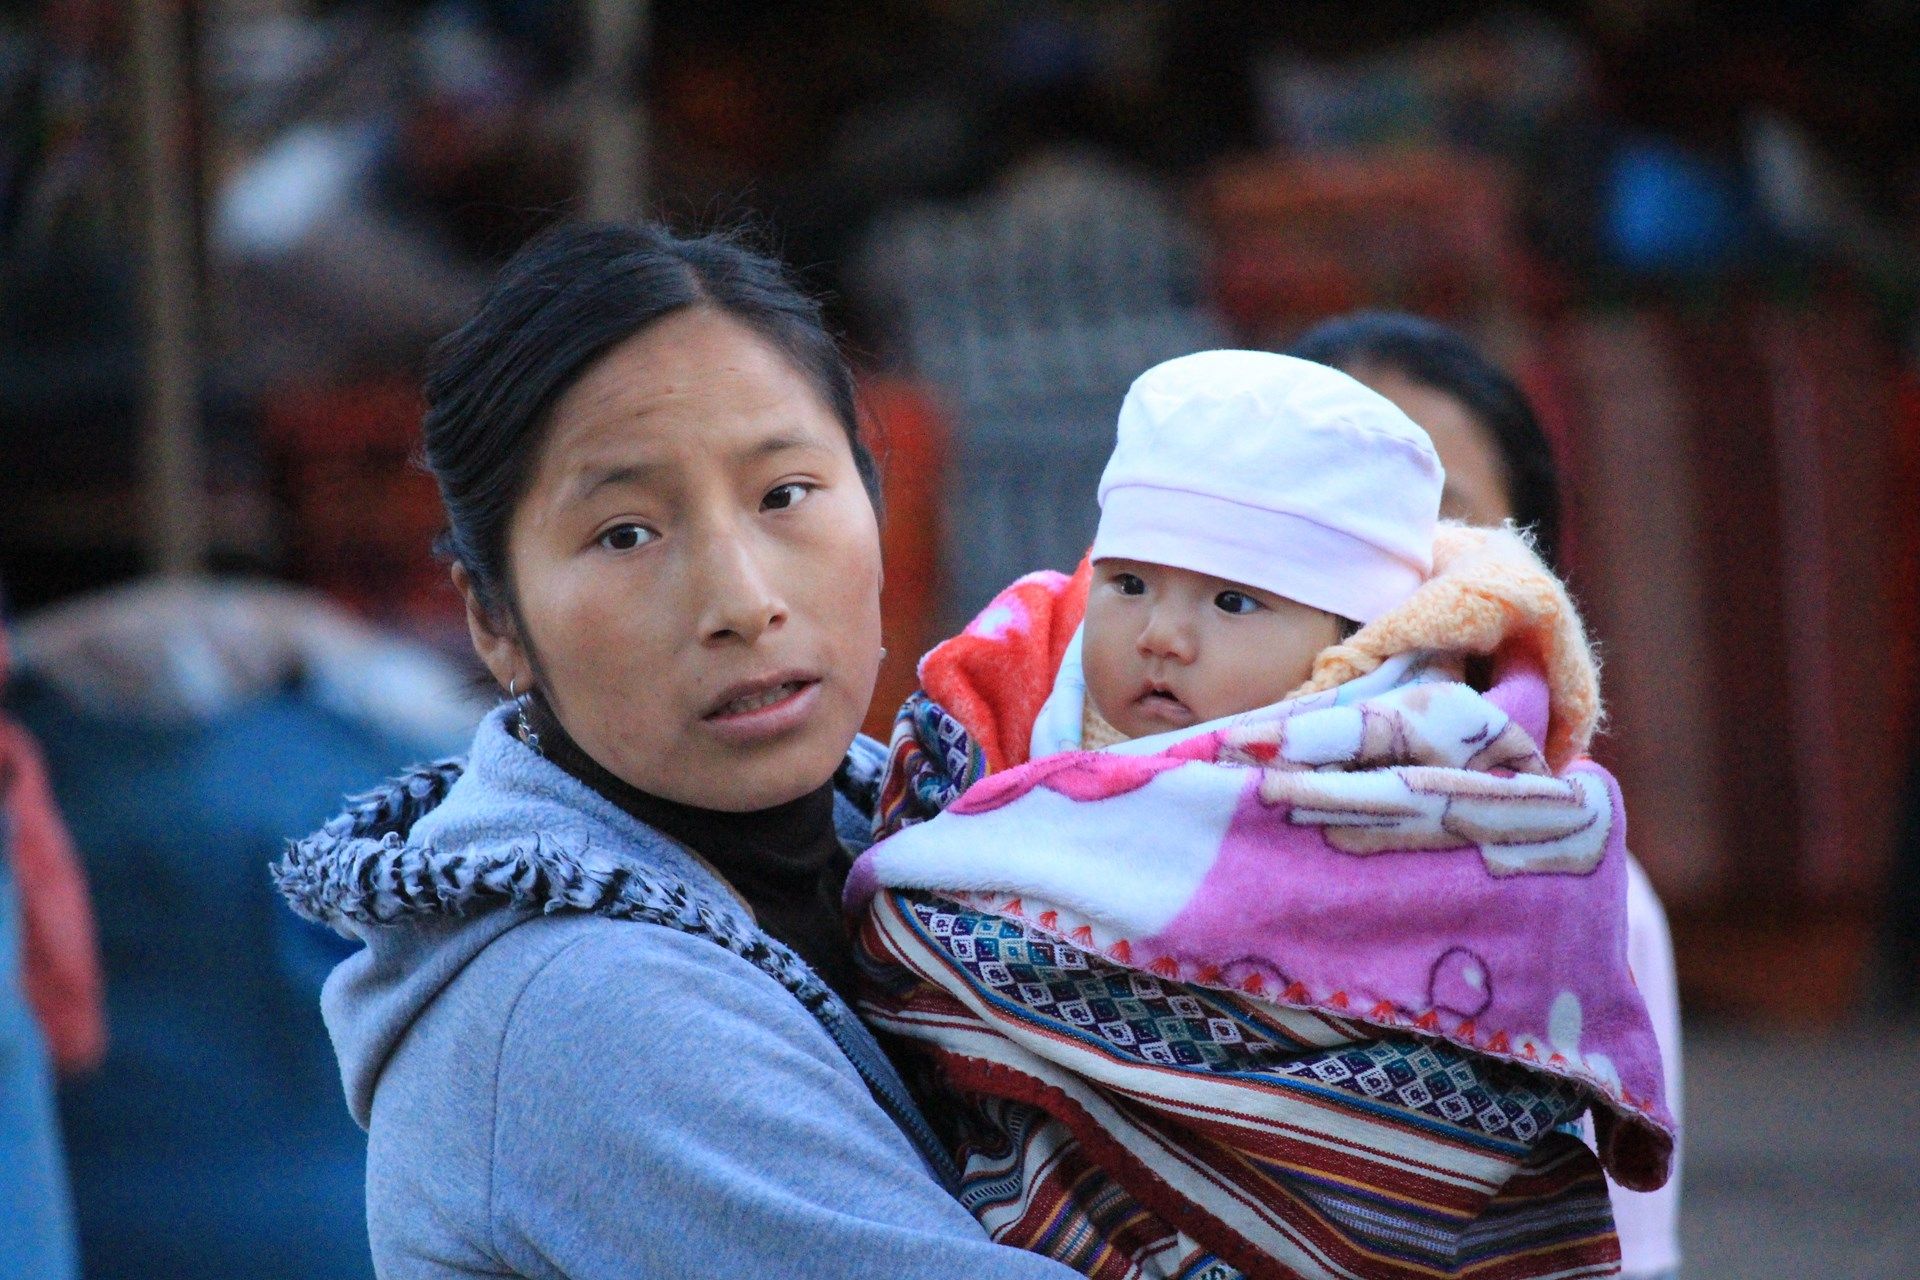 Woman and Baby in Peru